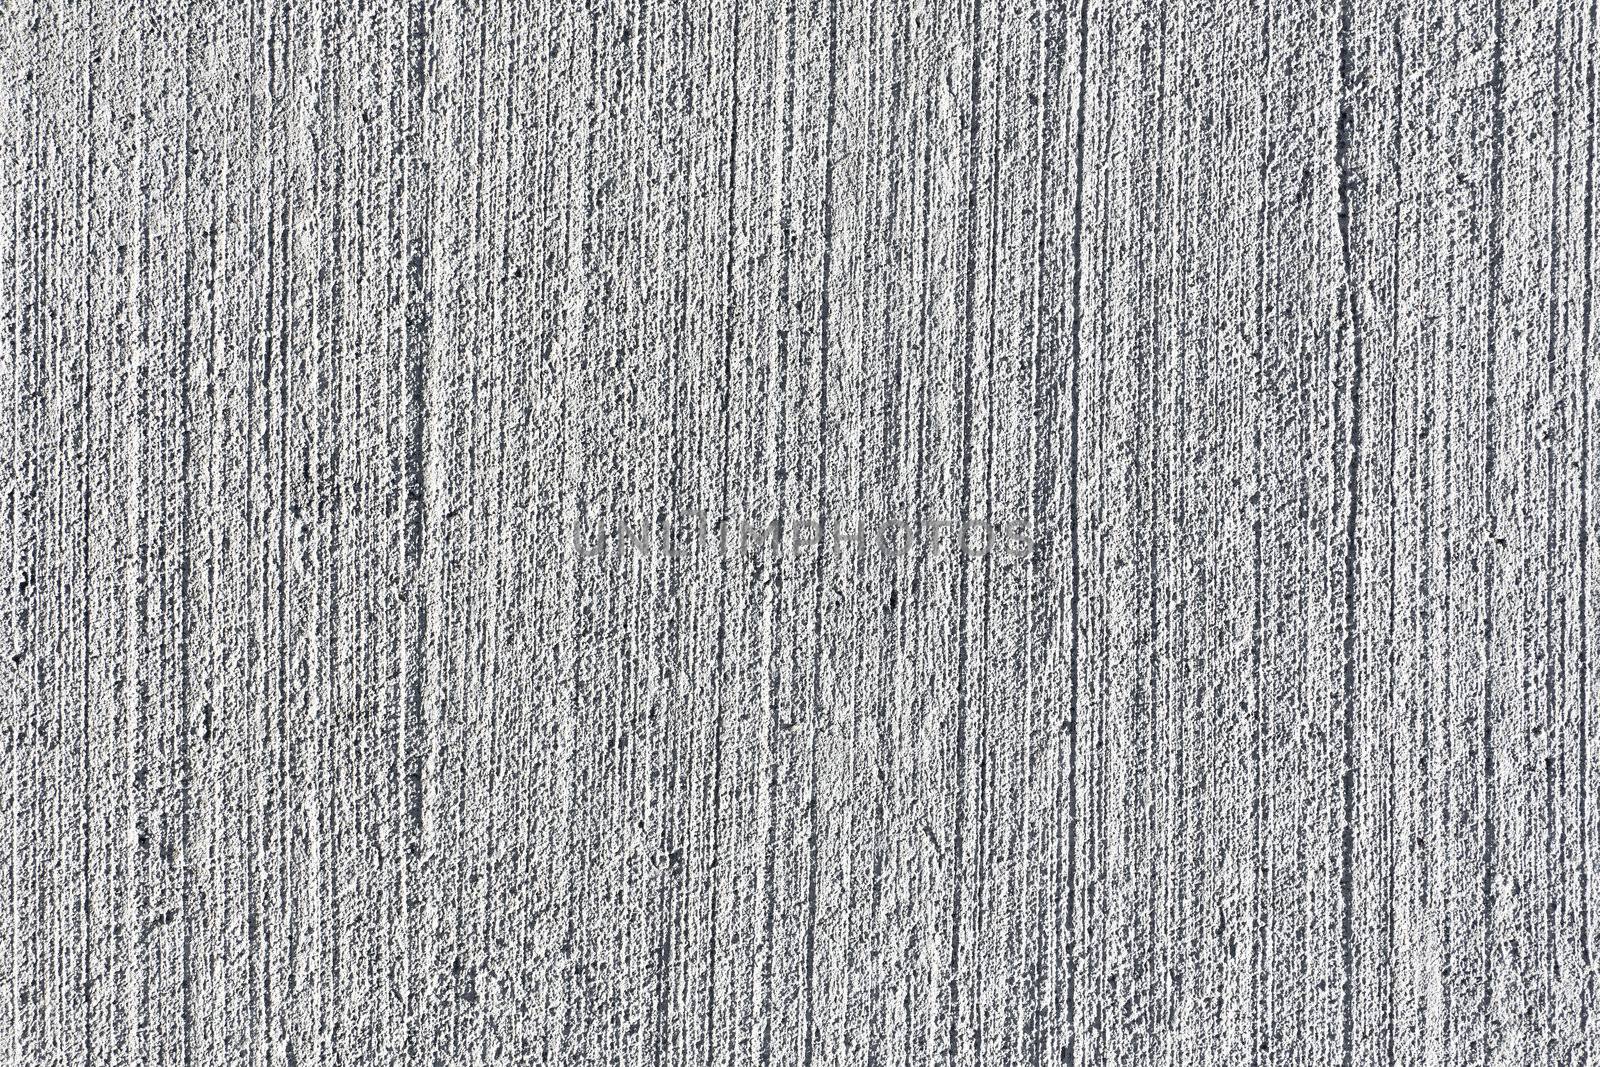 Background of concrete with textured brushed finish